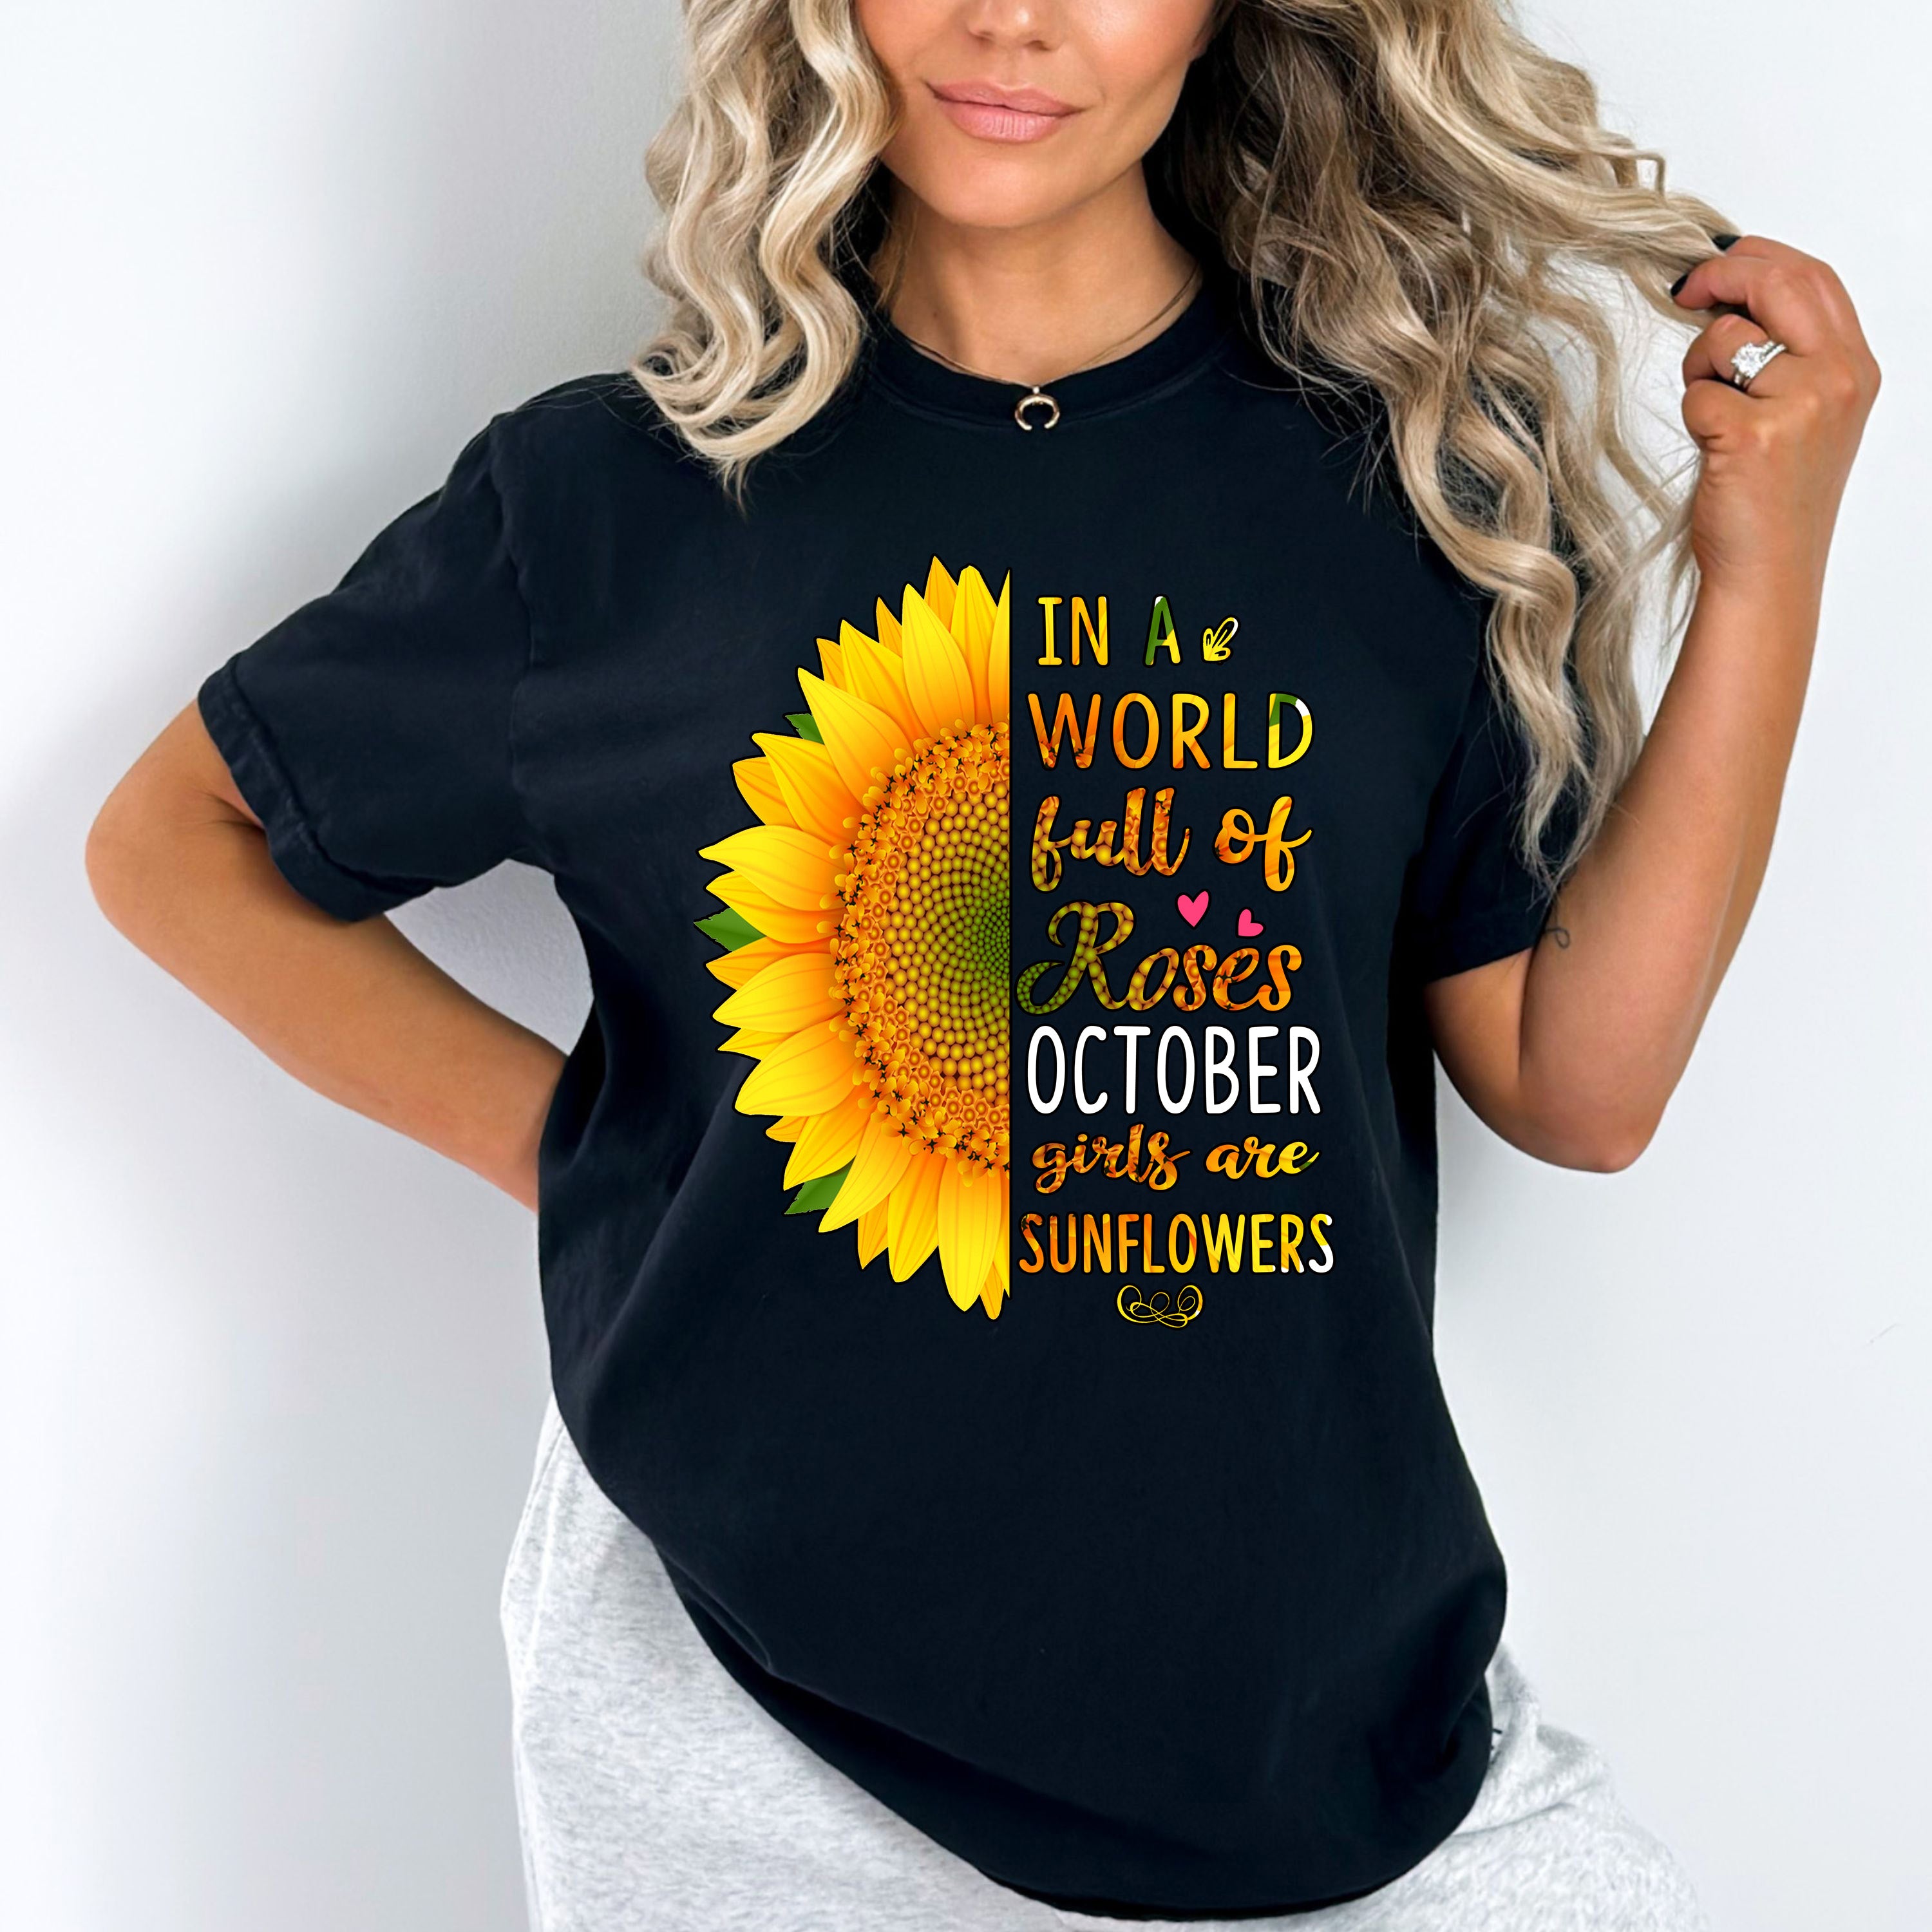 "In A World Full Of Roses October Girls are Sunflowers"